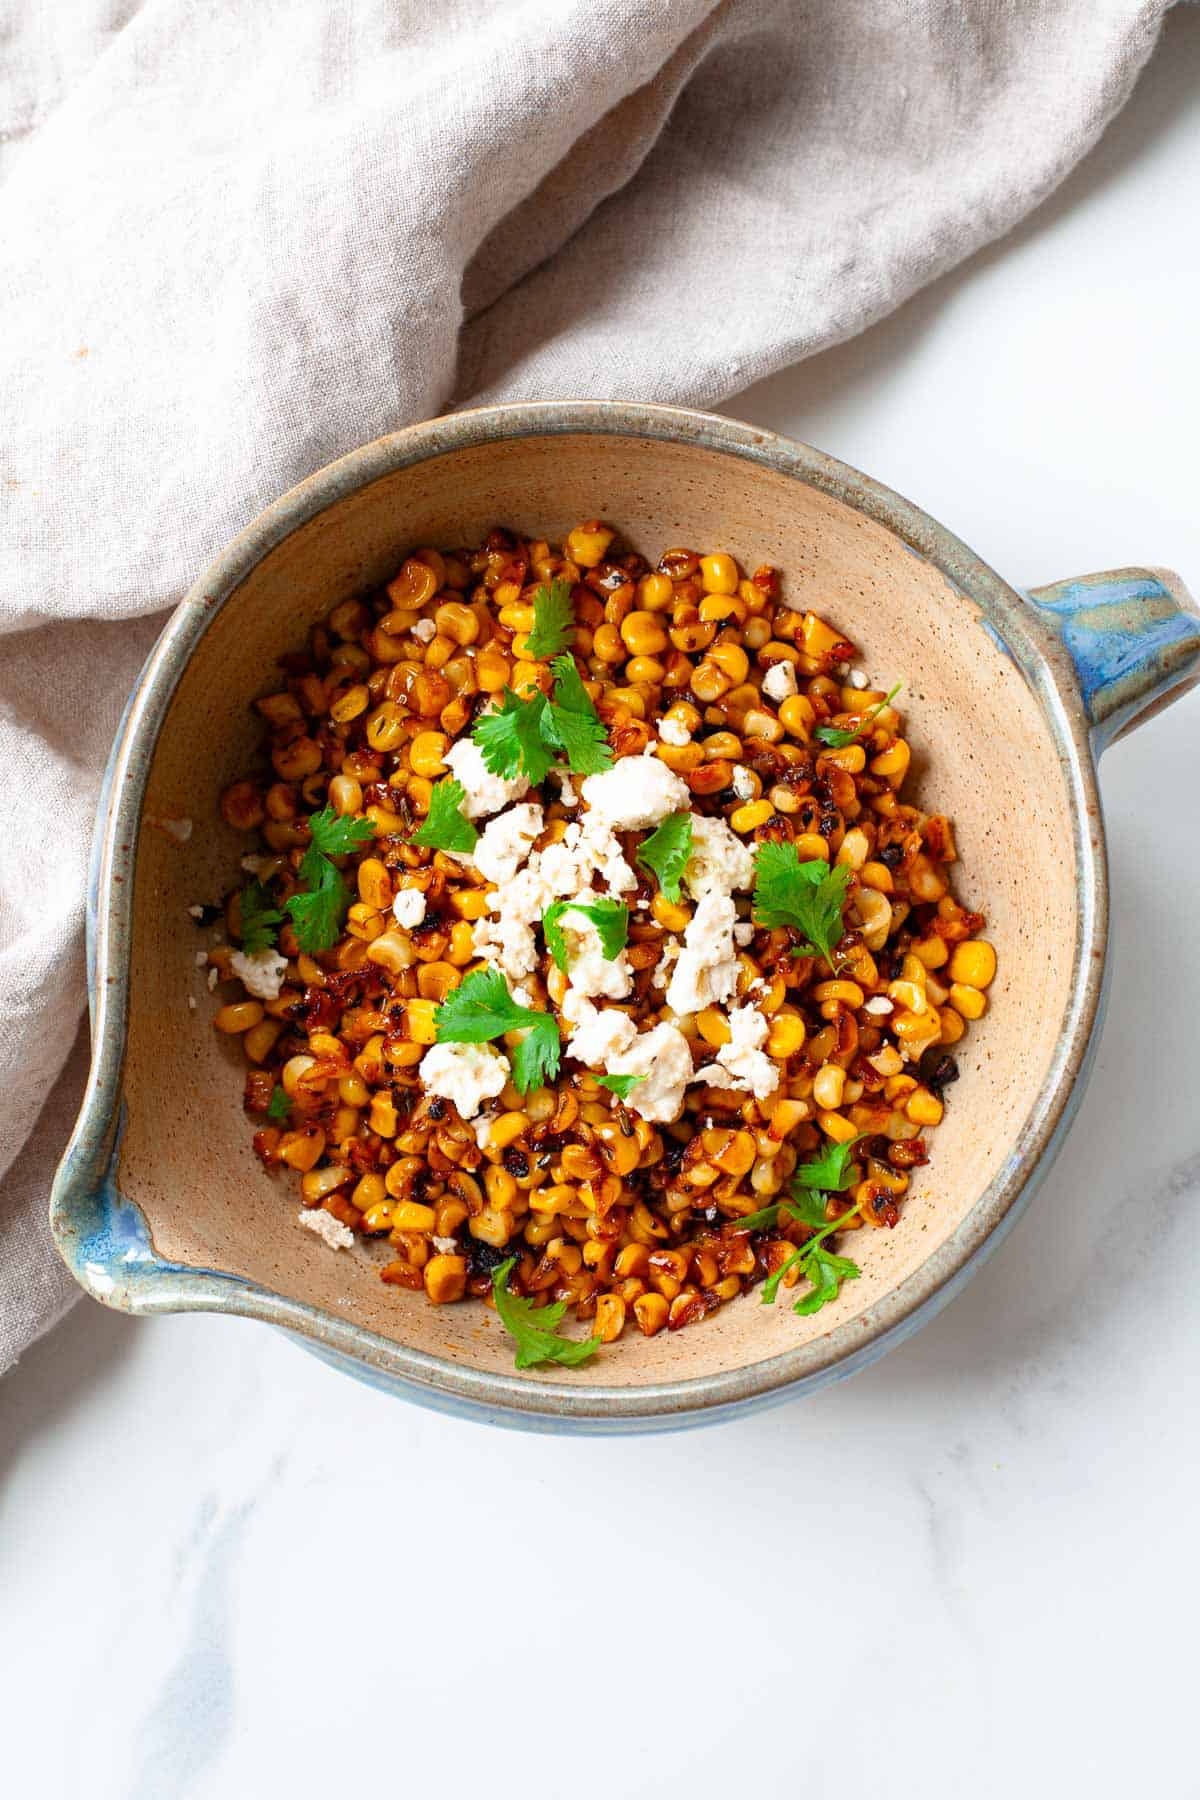 blackened corn in a bowl with a mango topped with fresh cilantro and crumbled feta next to a kitchen towel